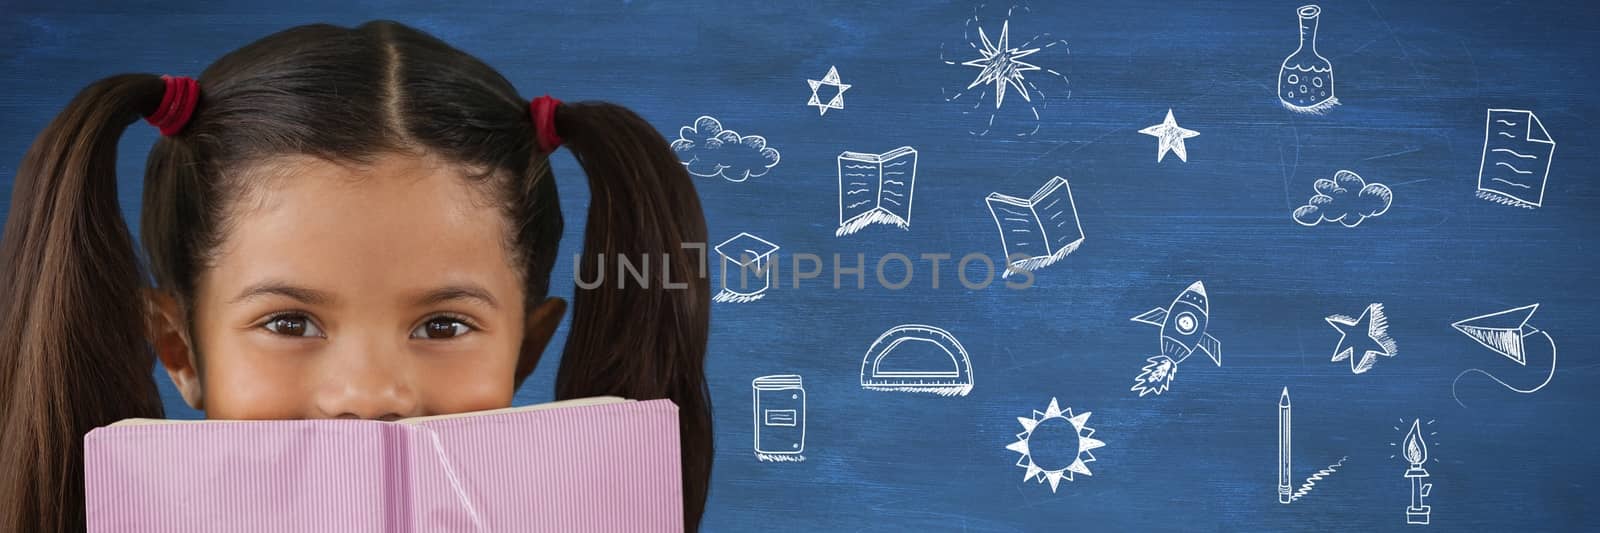 Digital composite of School girl reading and Education drawing on blackboard for school